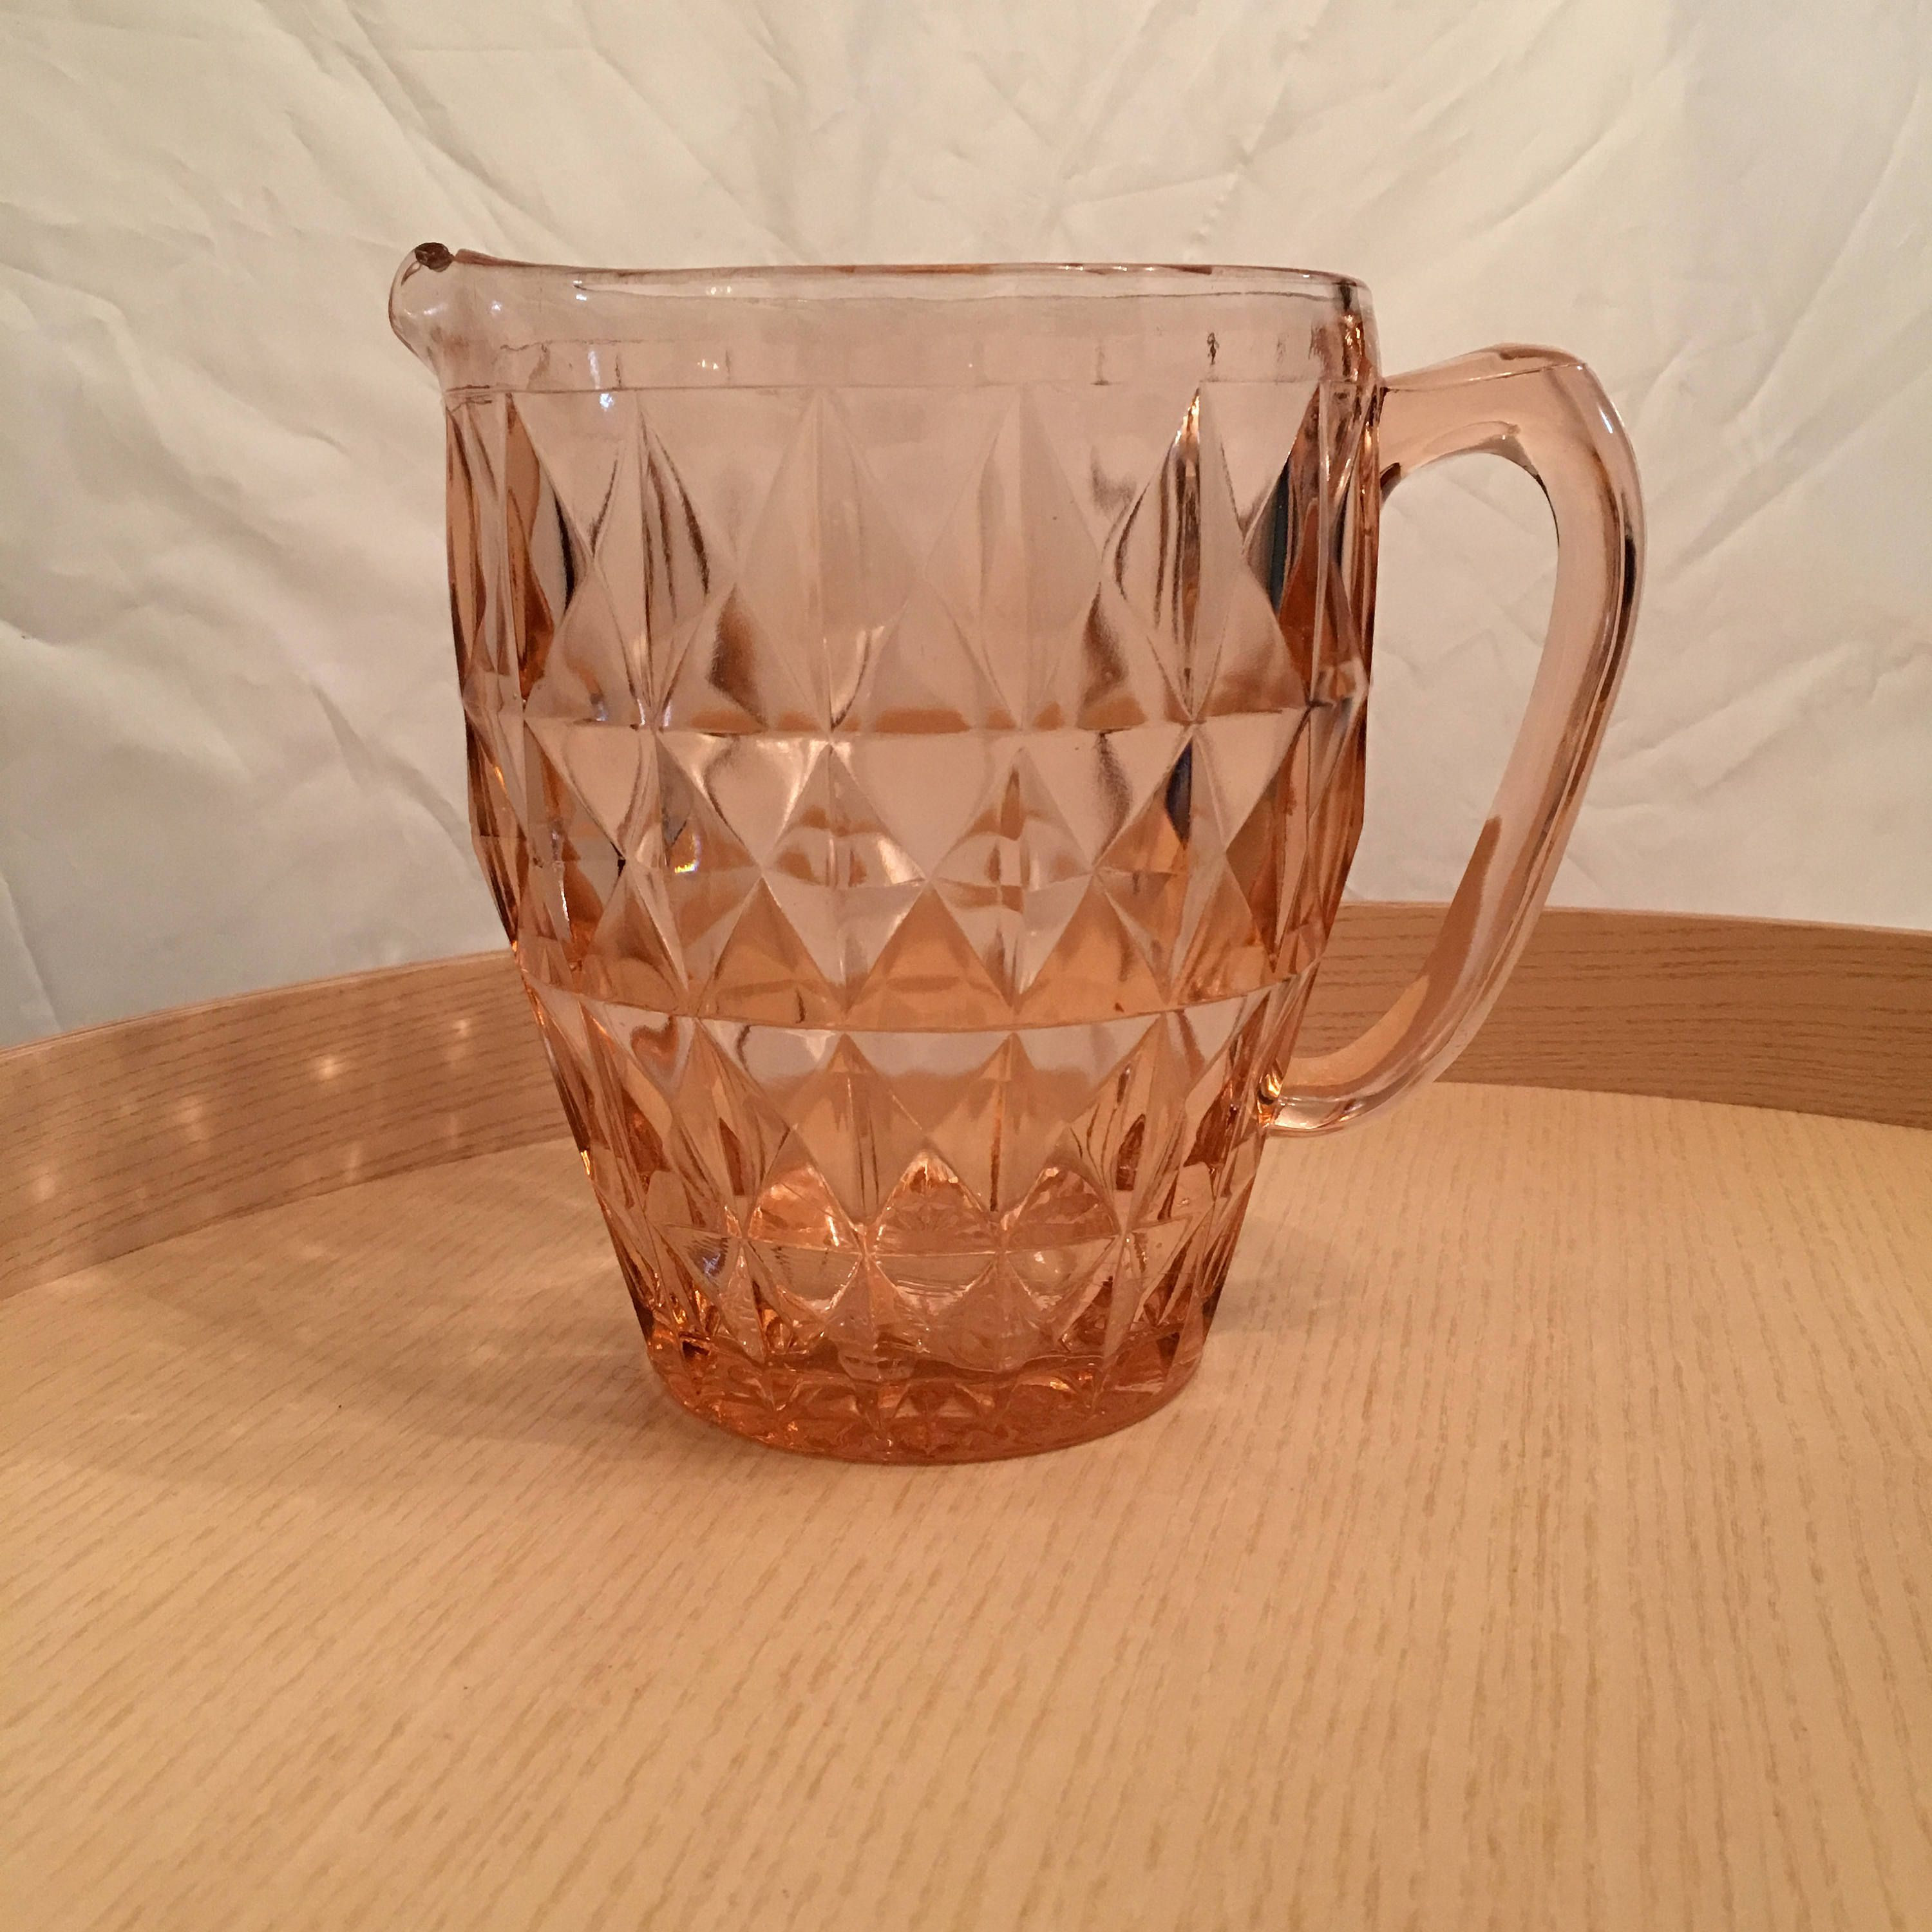 13 Popular Heavy Cut Glass Vase 2024 free download heavy cut glass vase of depression glass jeannette windsor diamond pitcher vase large pink within depression glass jeannette windsor diamond pitcher large pink glass pitcher vintage diamond 